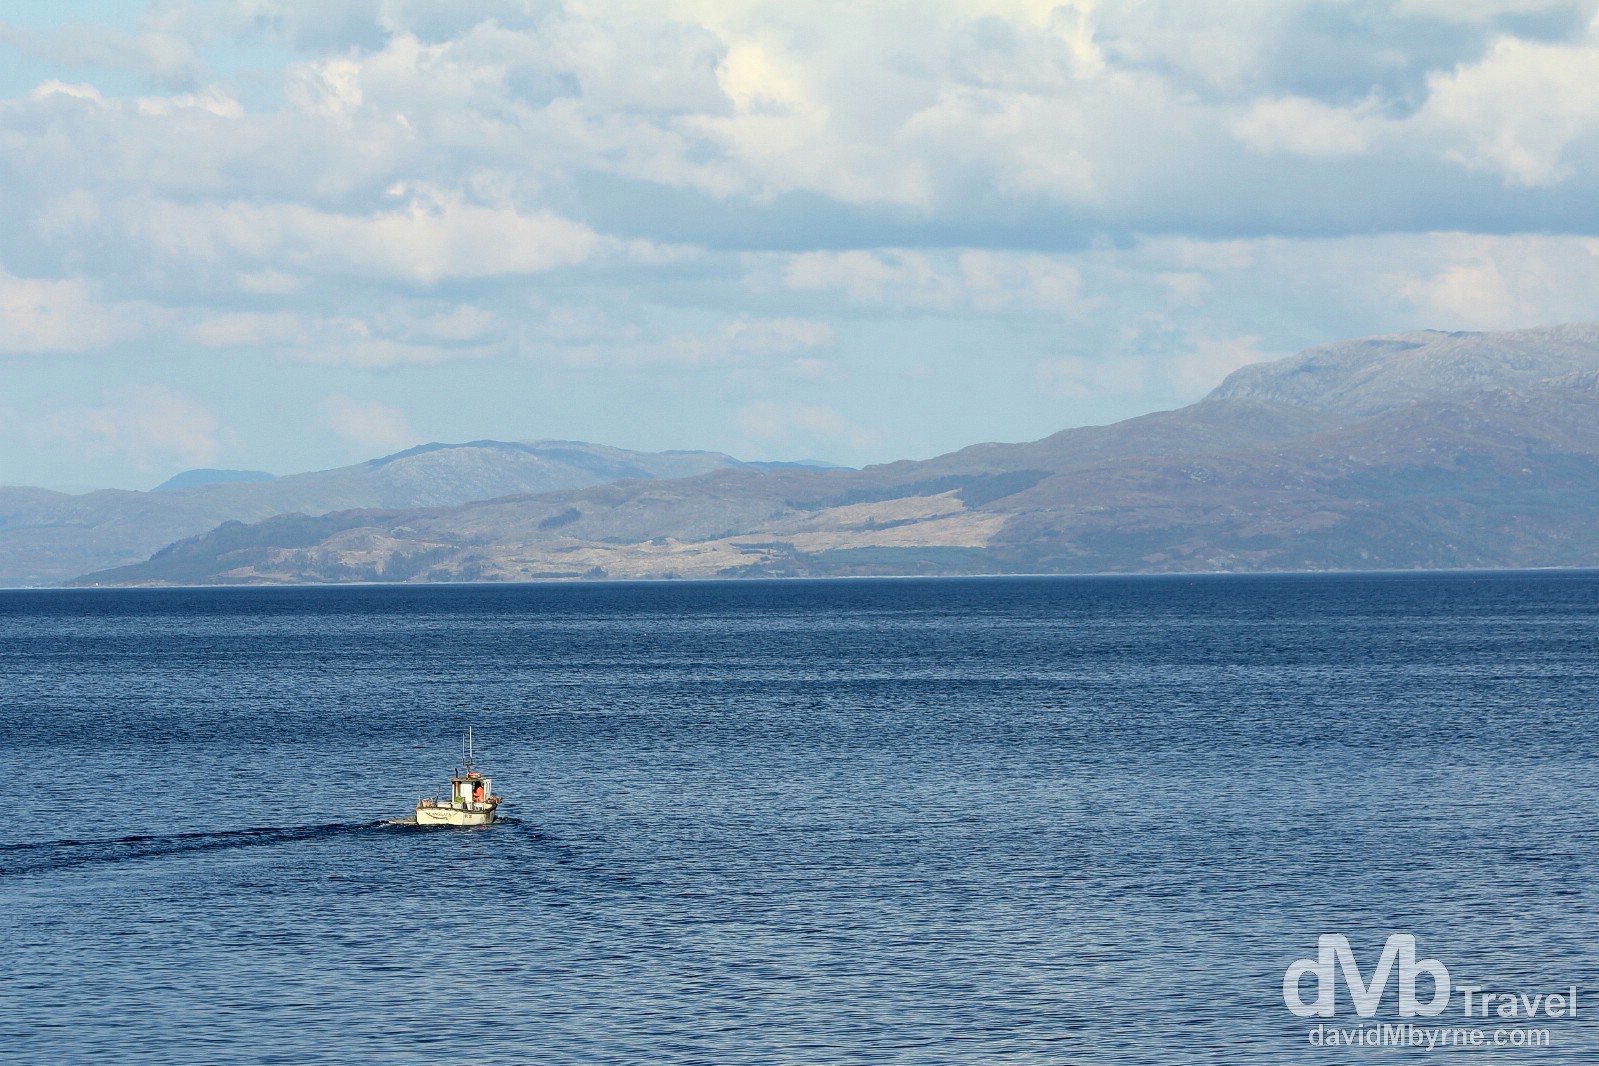 As seen from the Armadale to Mallaig ferry crossing the narrow Sound of Sleat, western Scotland. September 17, 2014.